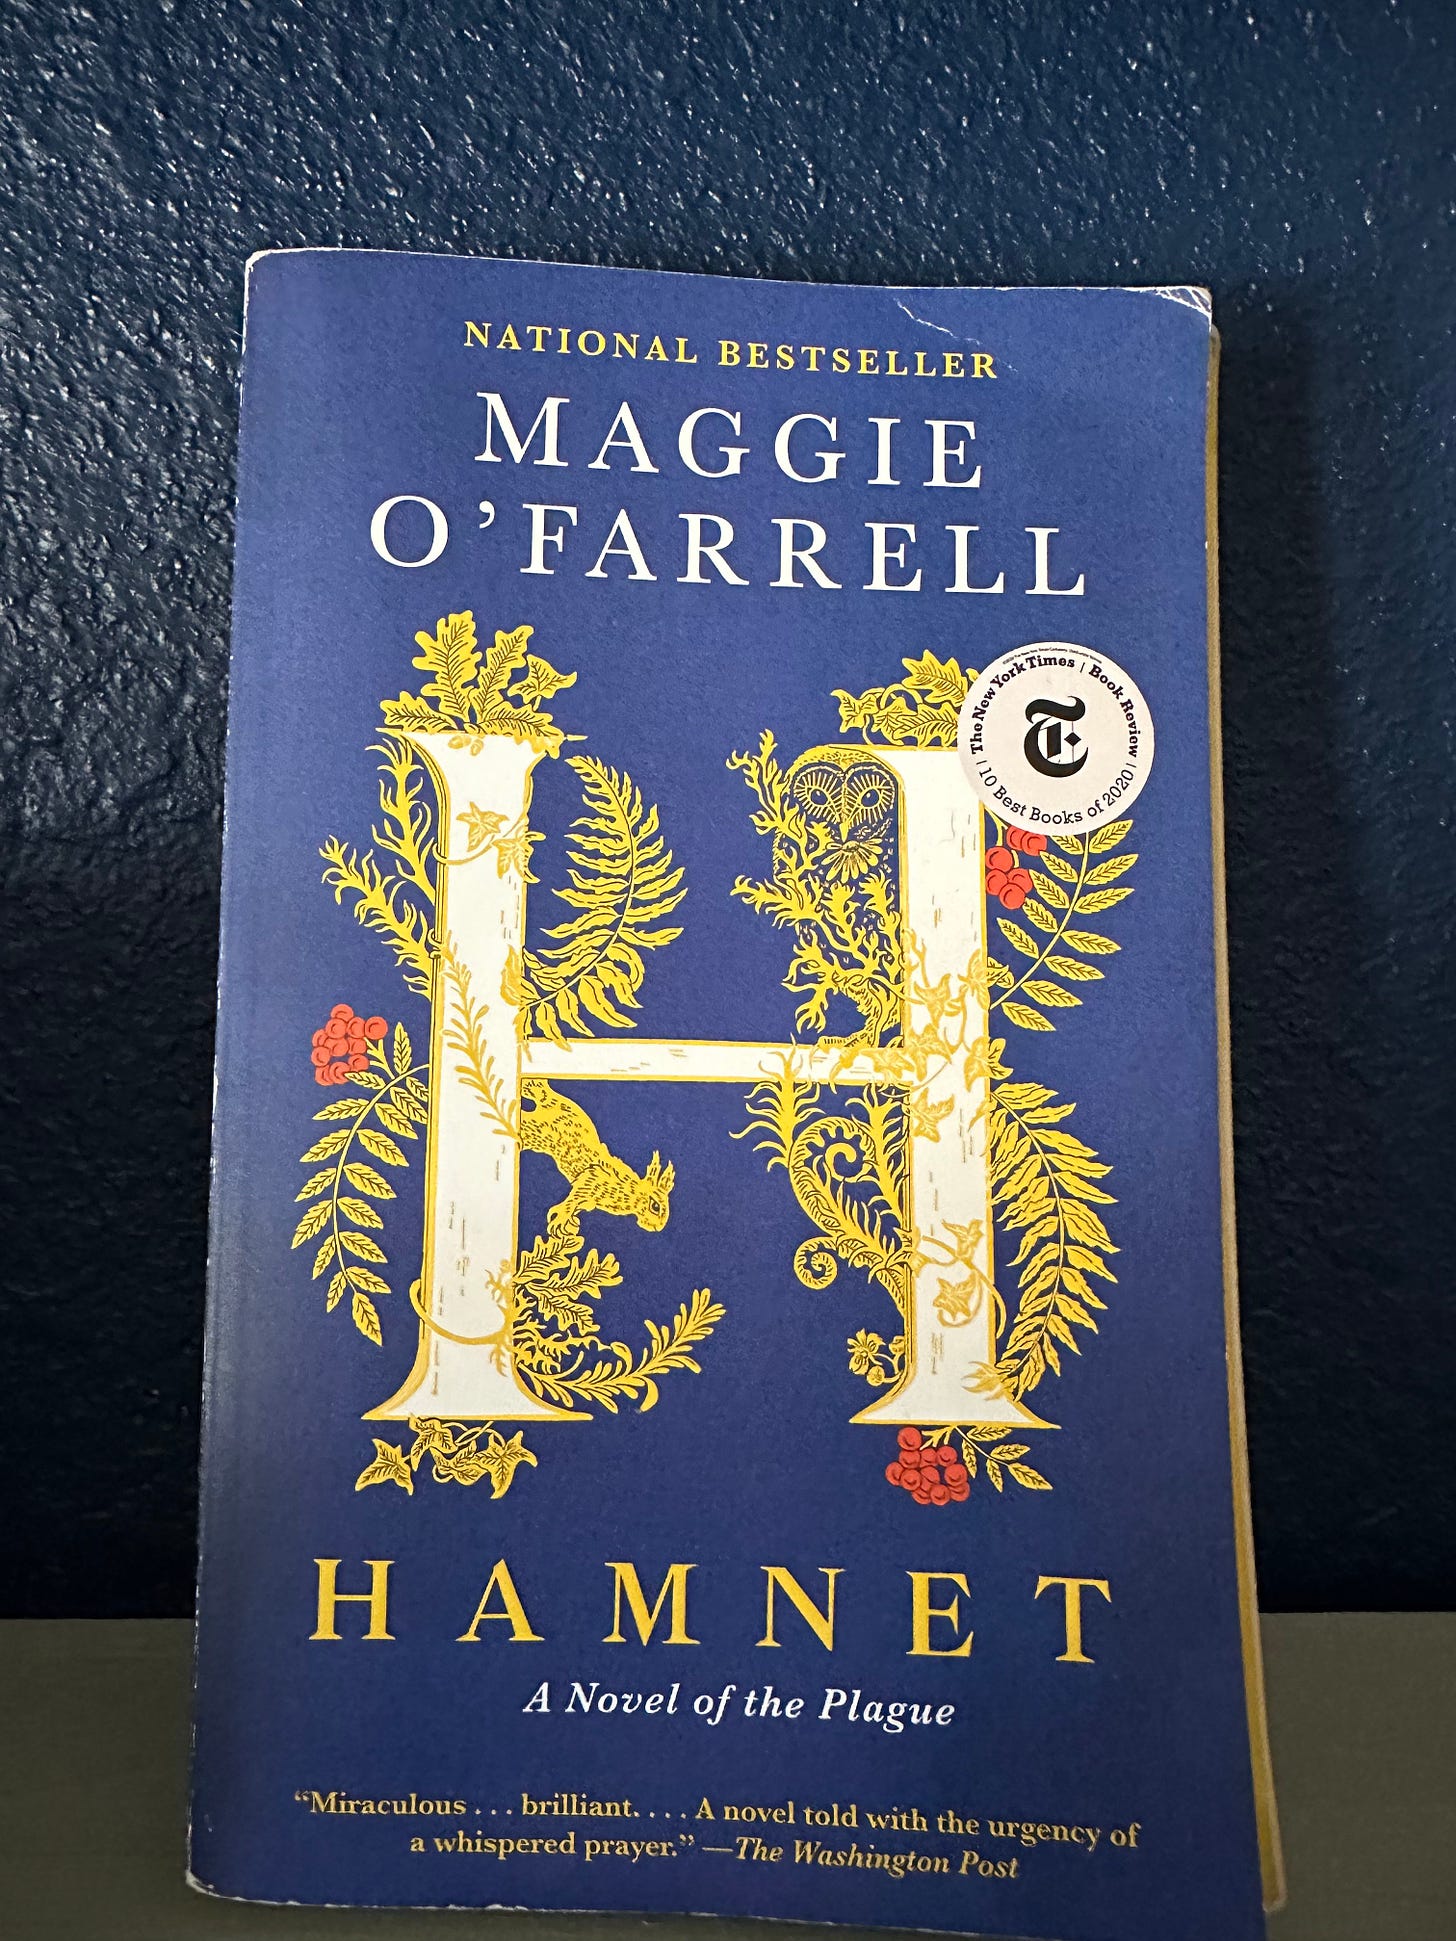 Front cover of the book "Hamnet" by Maggie O'Farrell.